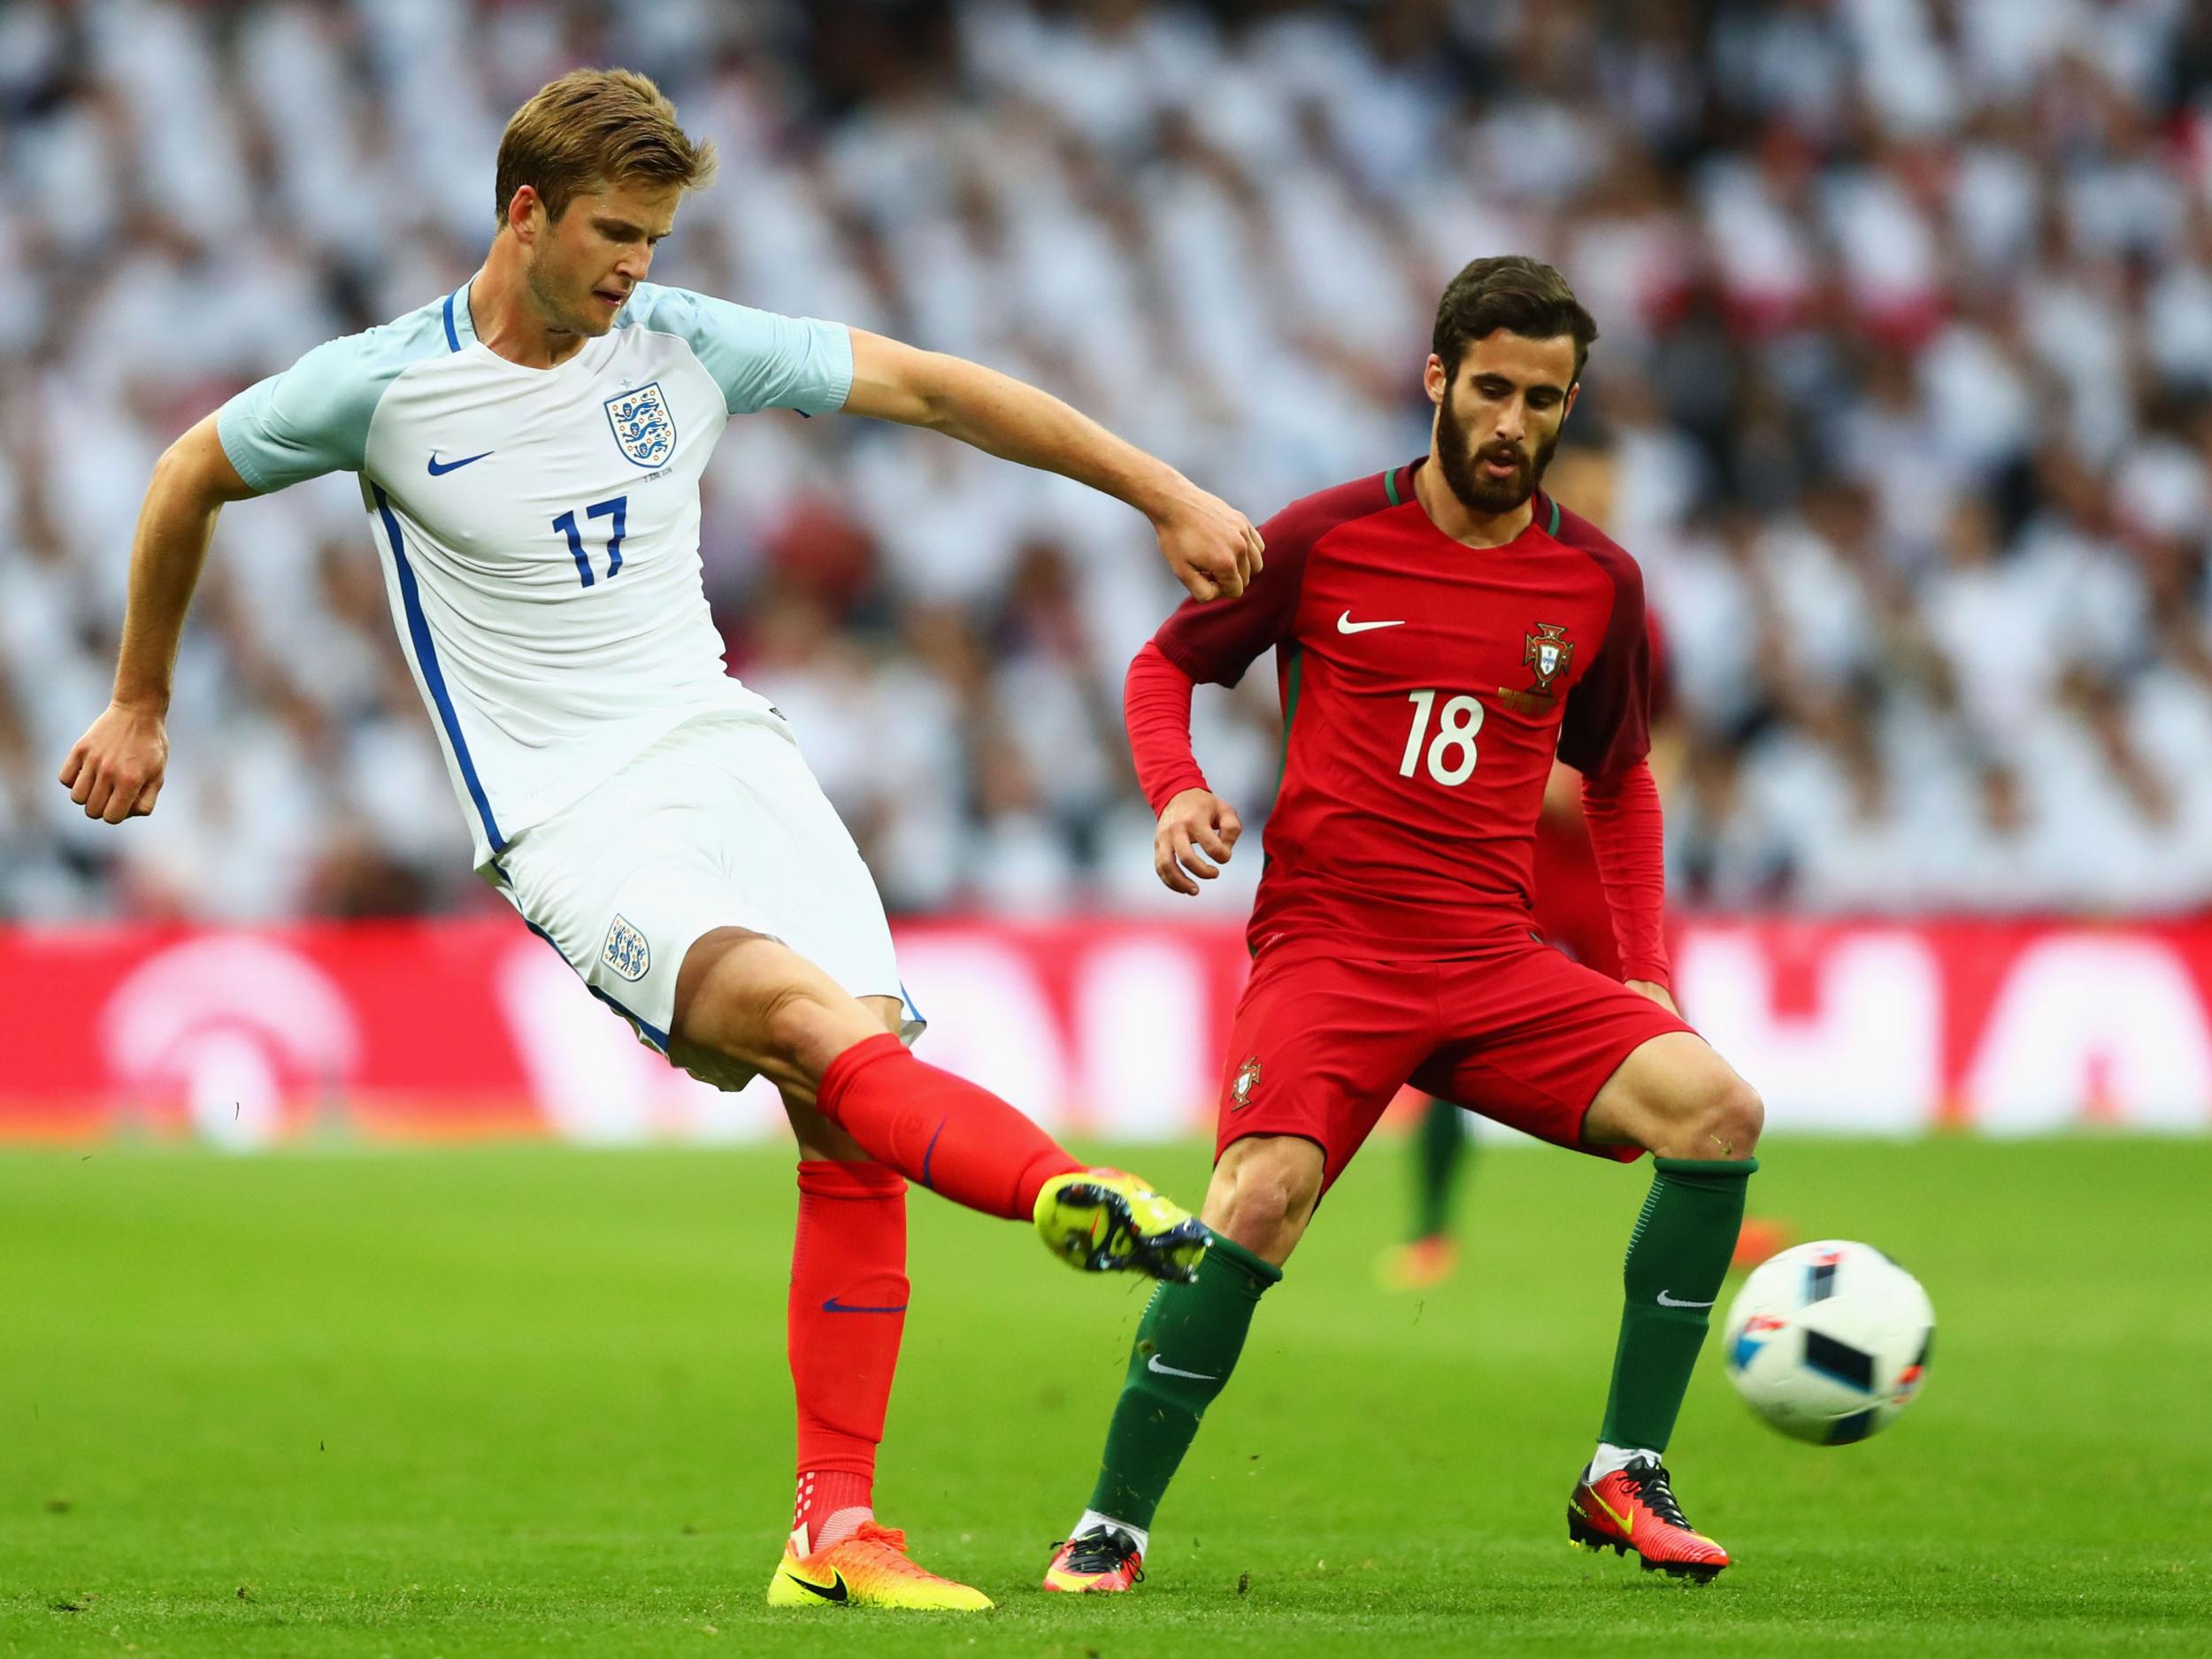 Dier was part of the team that beat Portugal in a Euro 2016 warm-up game